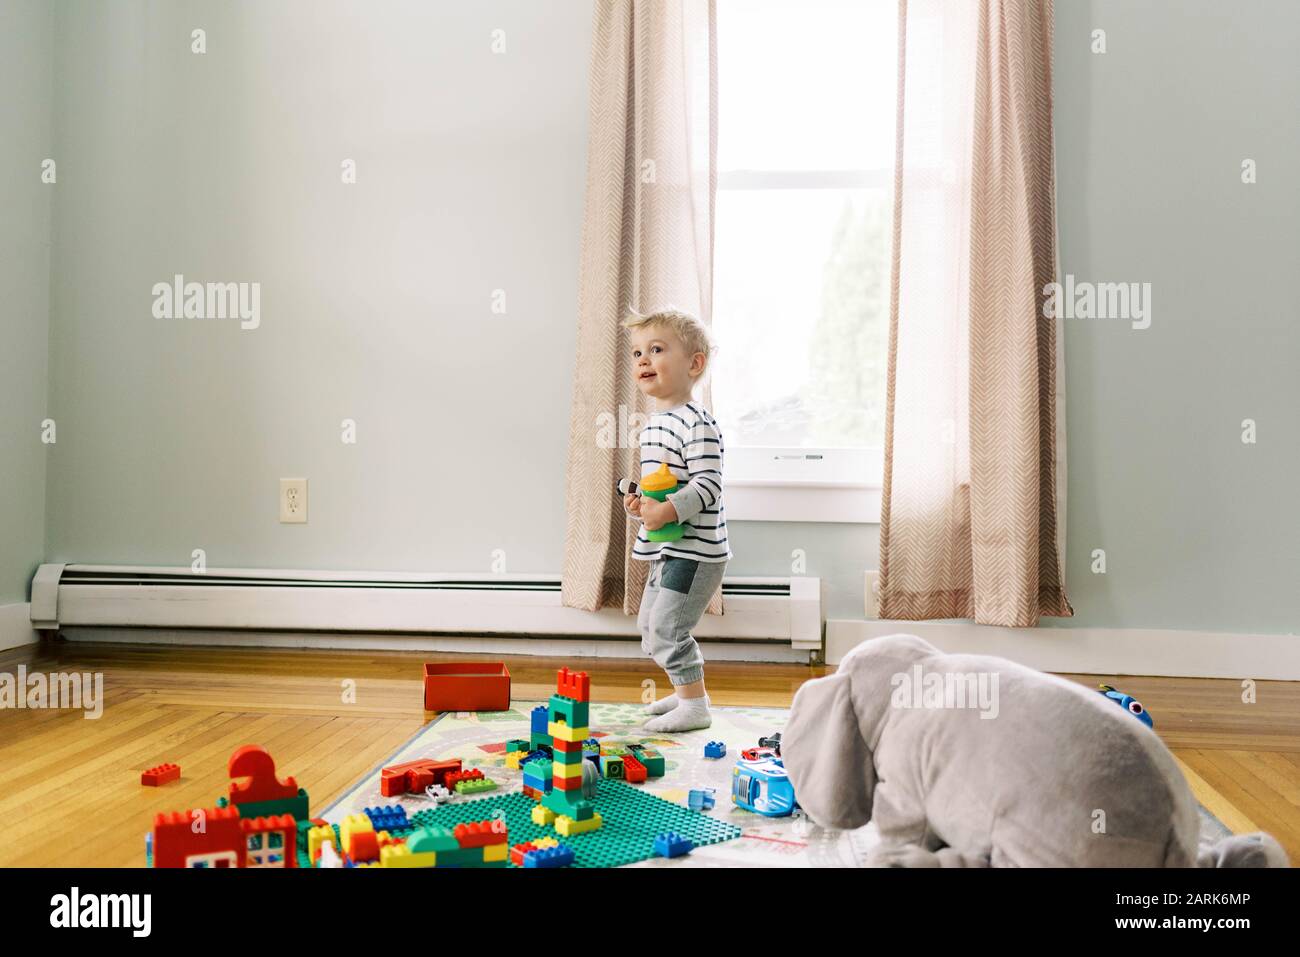 Little boy playing in his playroom. Stock Photo